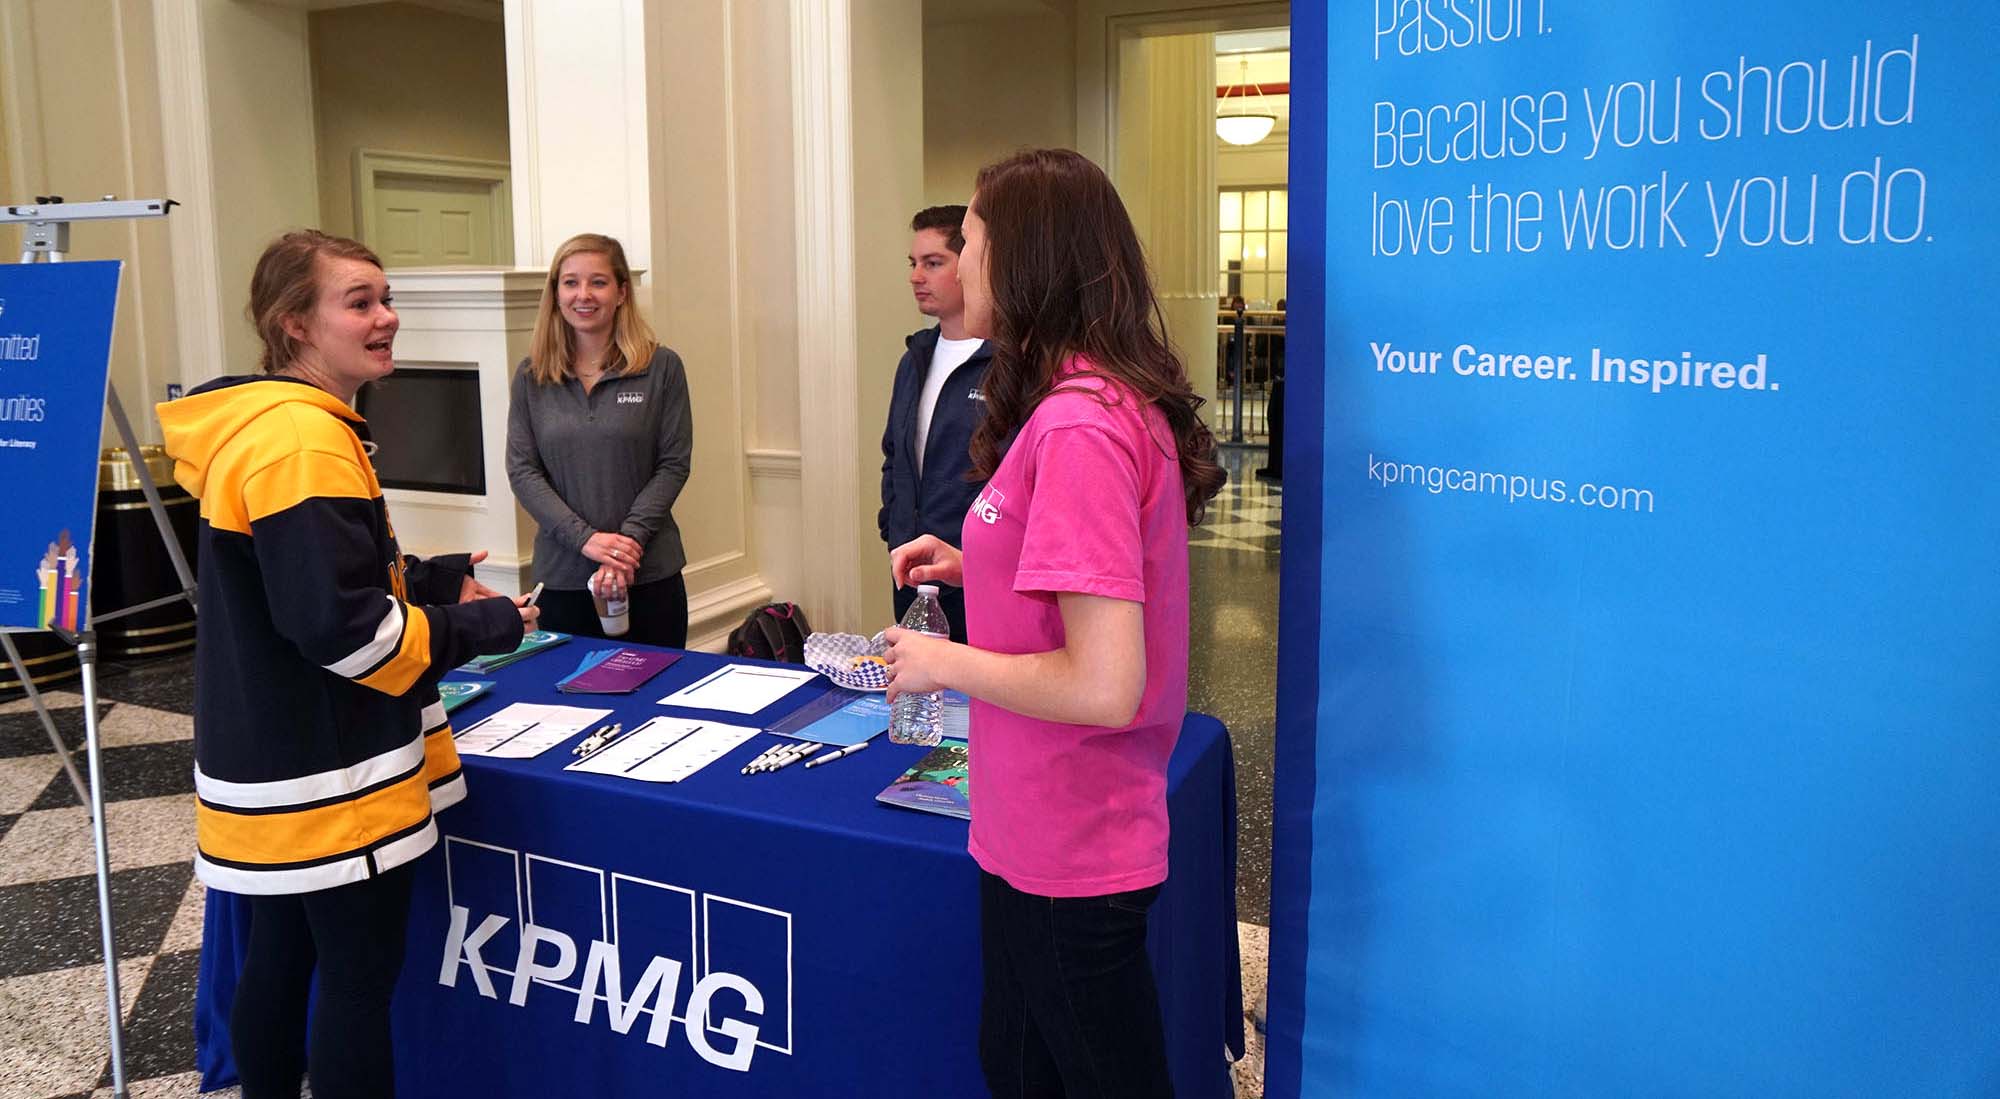 Students meet with KPMG employees at the KPMG picnic